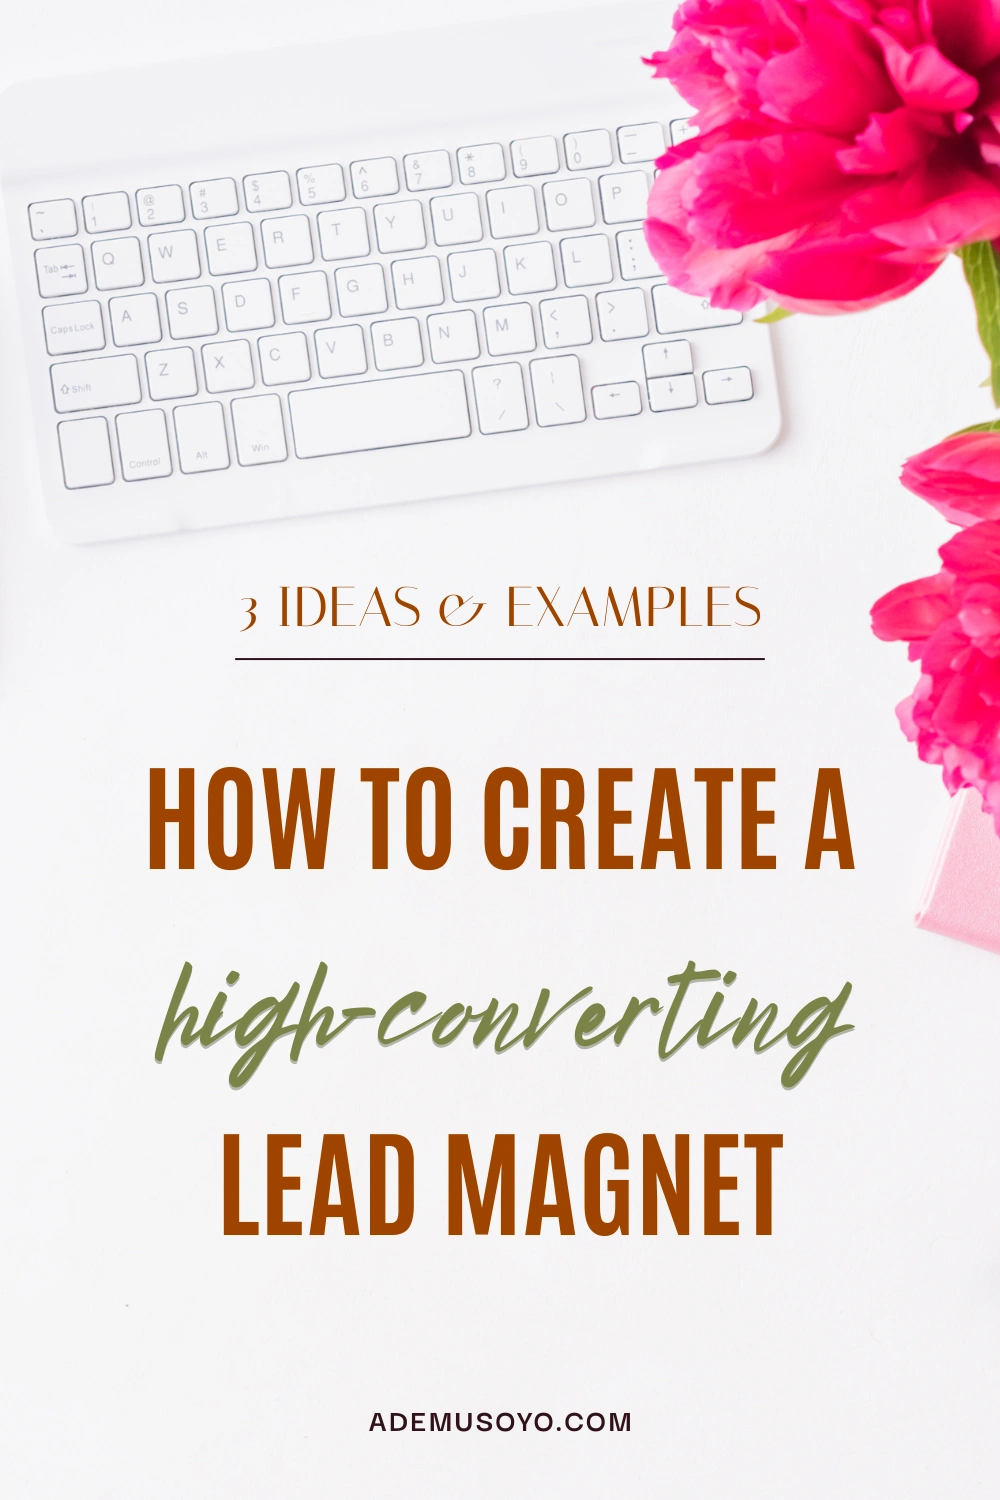 Tips on how to create a high-converting lead magnet, lead magnet examples, lead magnet ideas